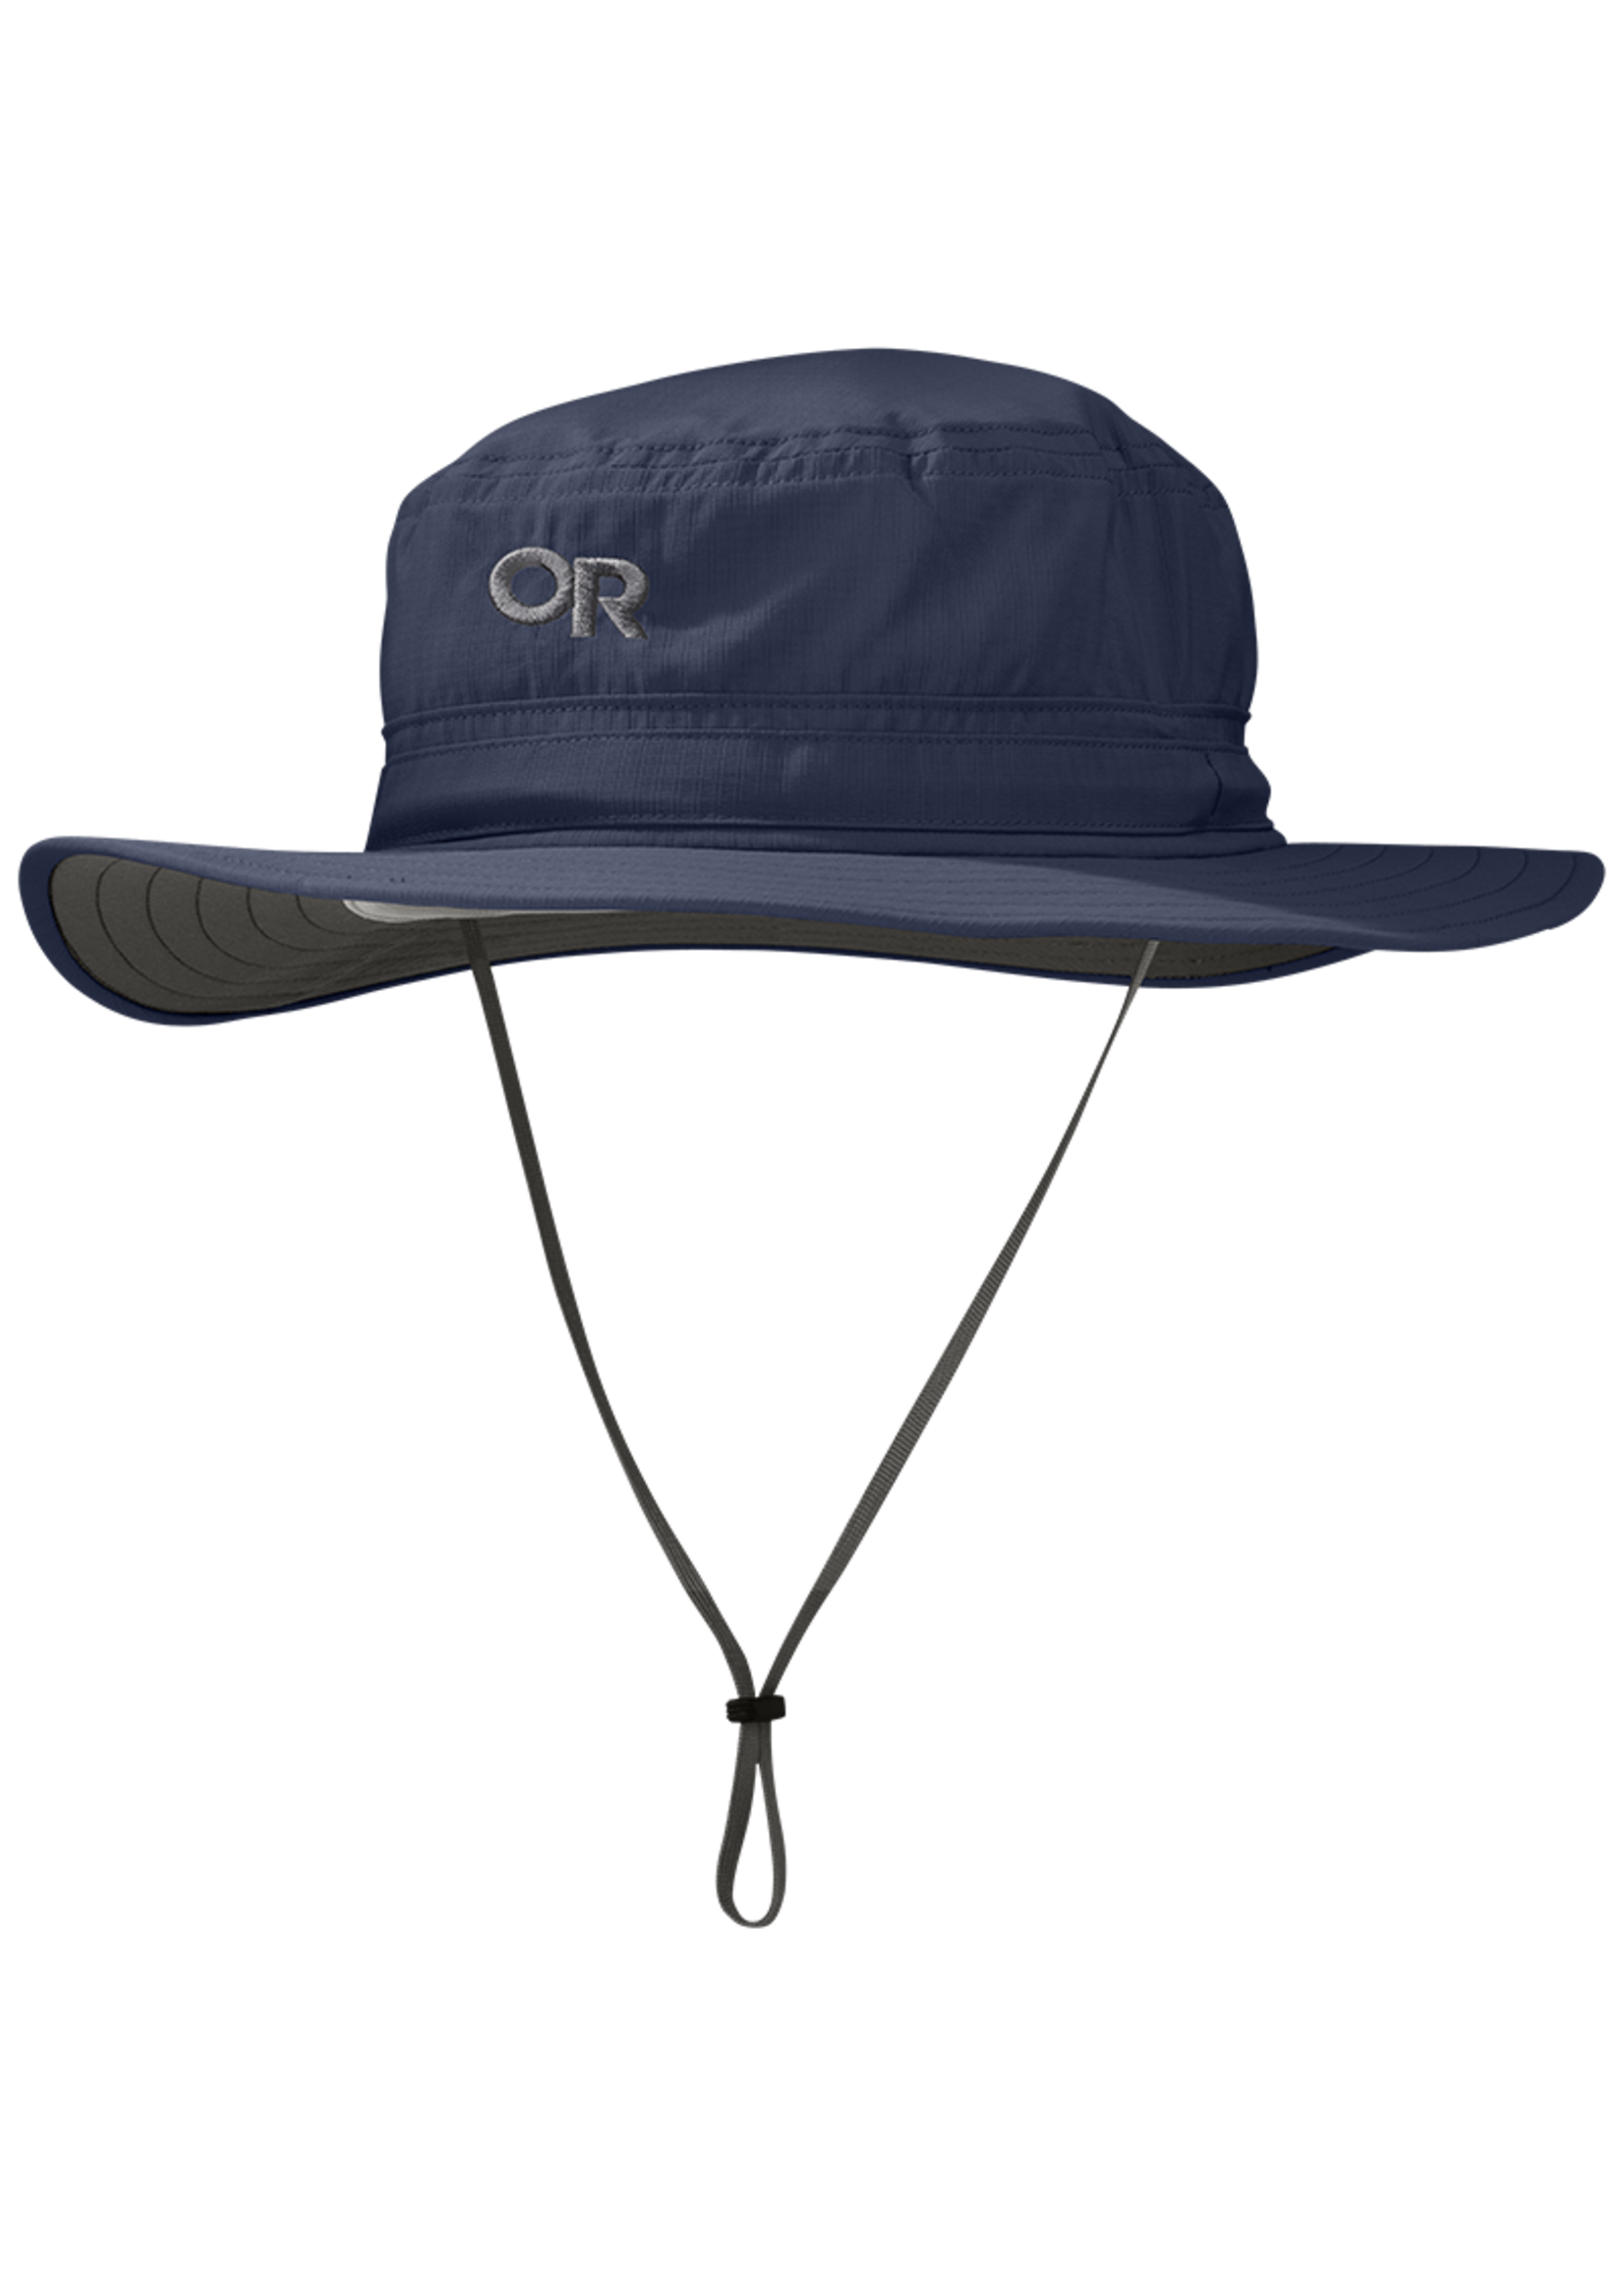 OUTDOOR RESEARCH Helios-Unisex hiking hat